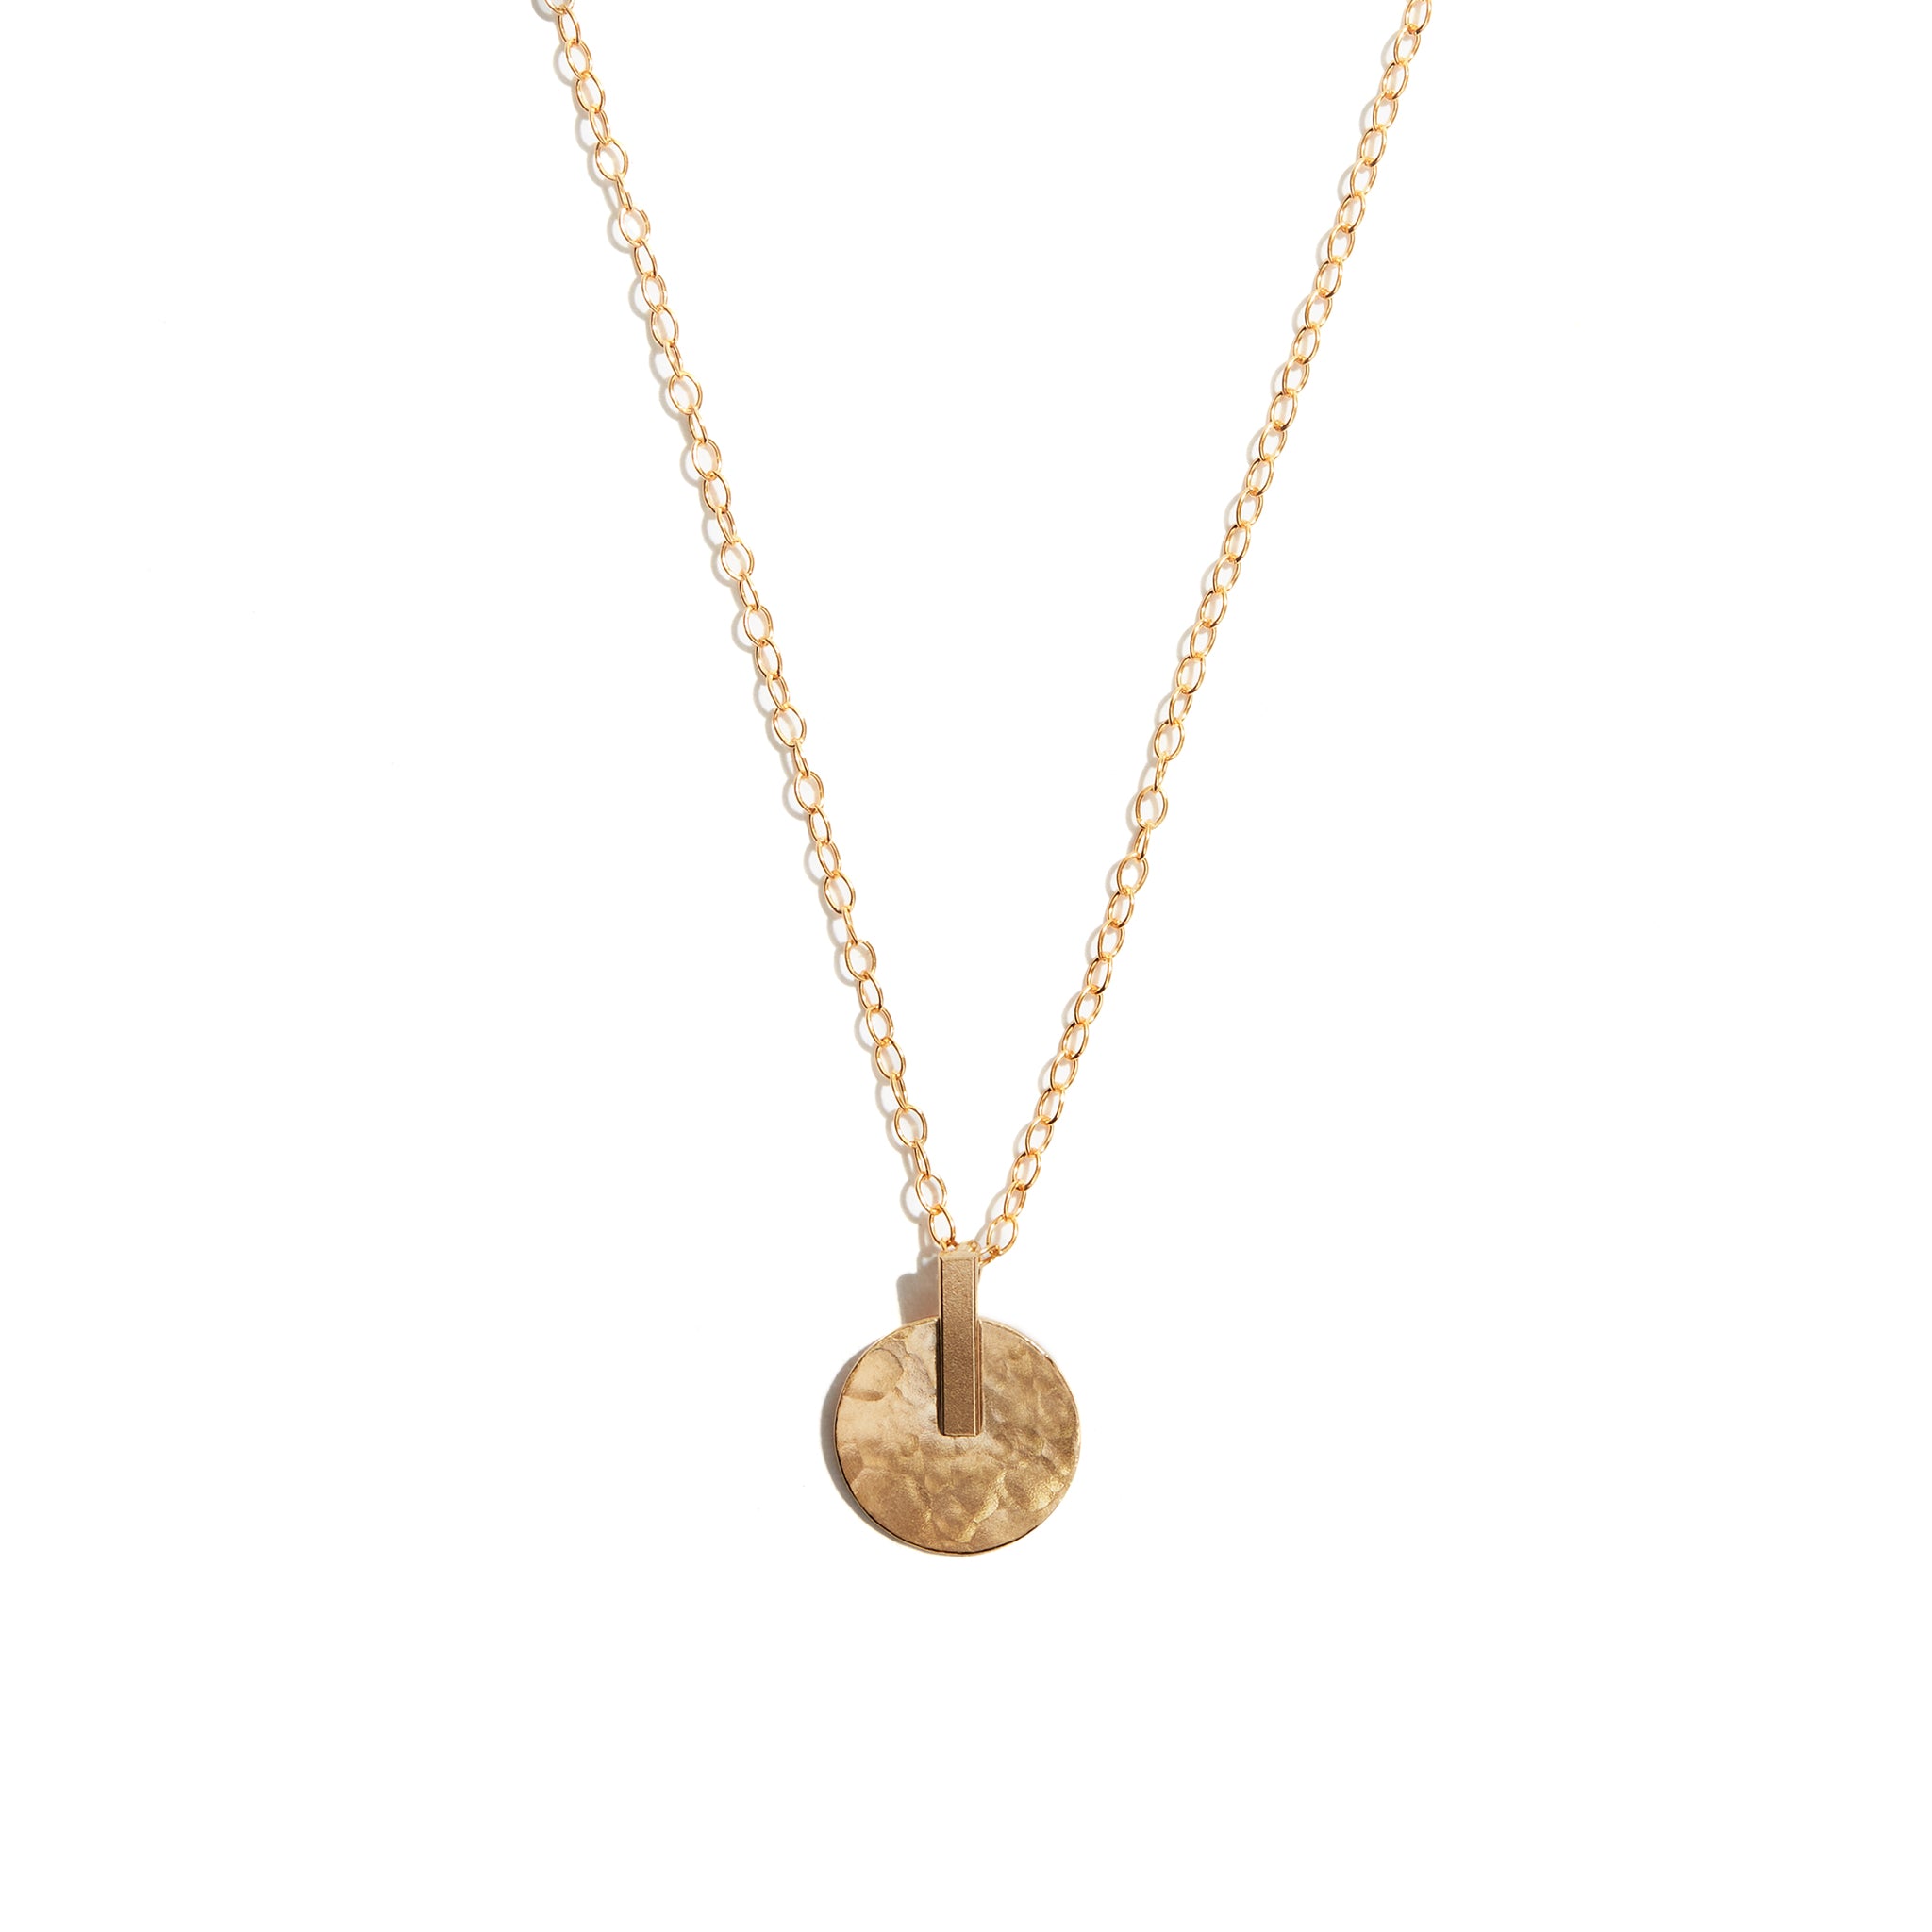 Stunning Hammered Disc Pendant crafted from 14 carat gold-fill, radiating timeless sophistication and charm.